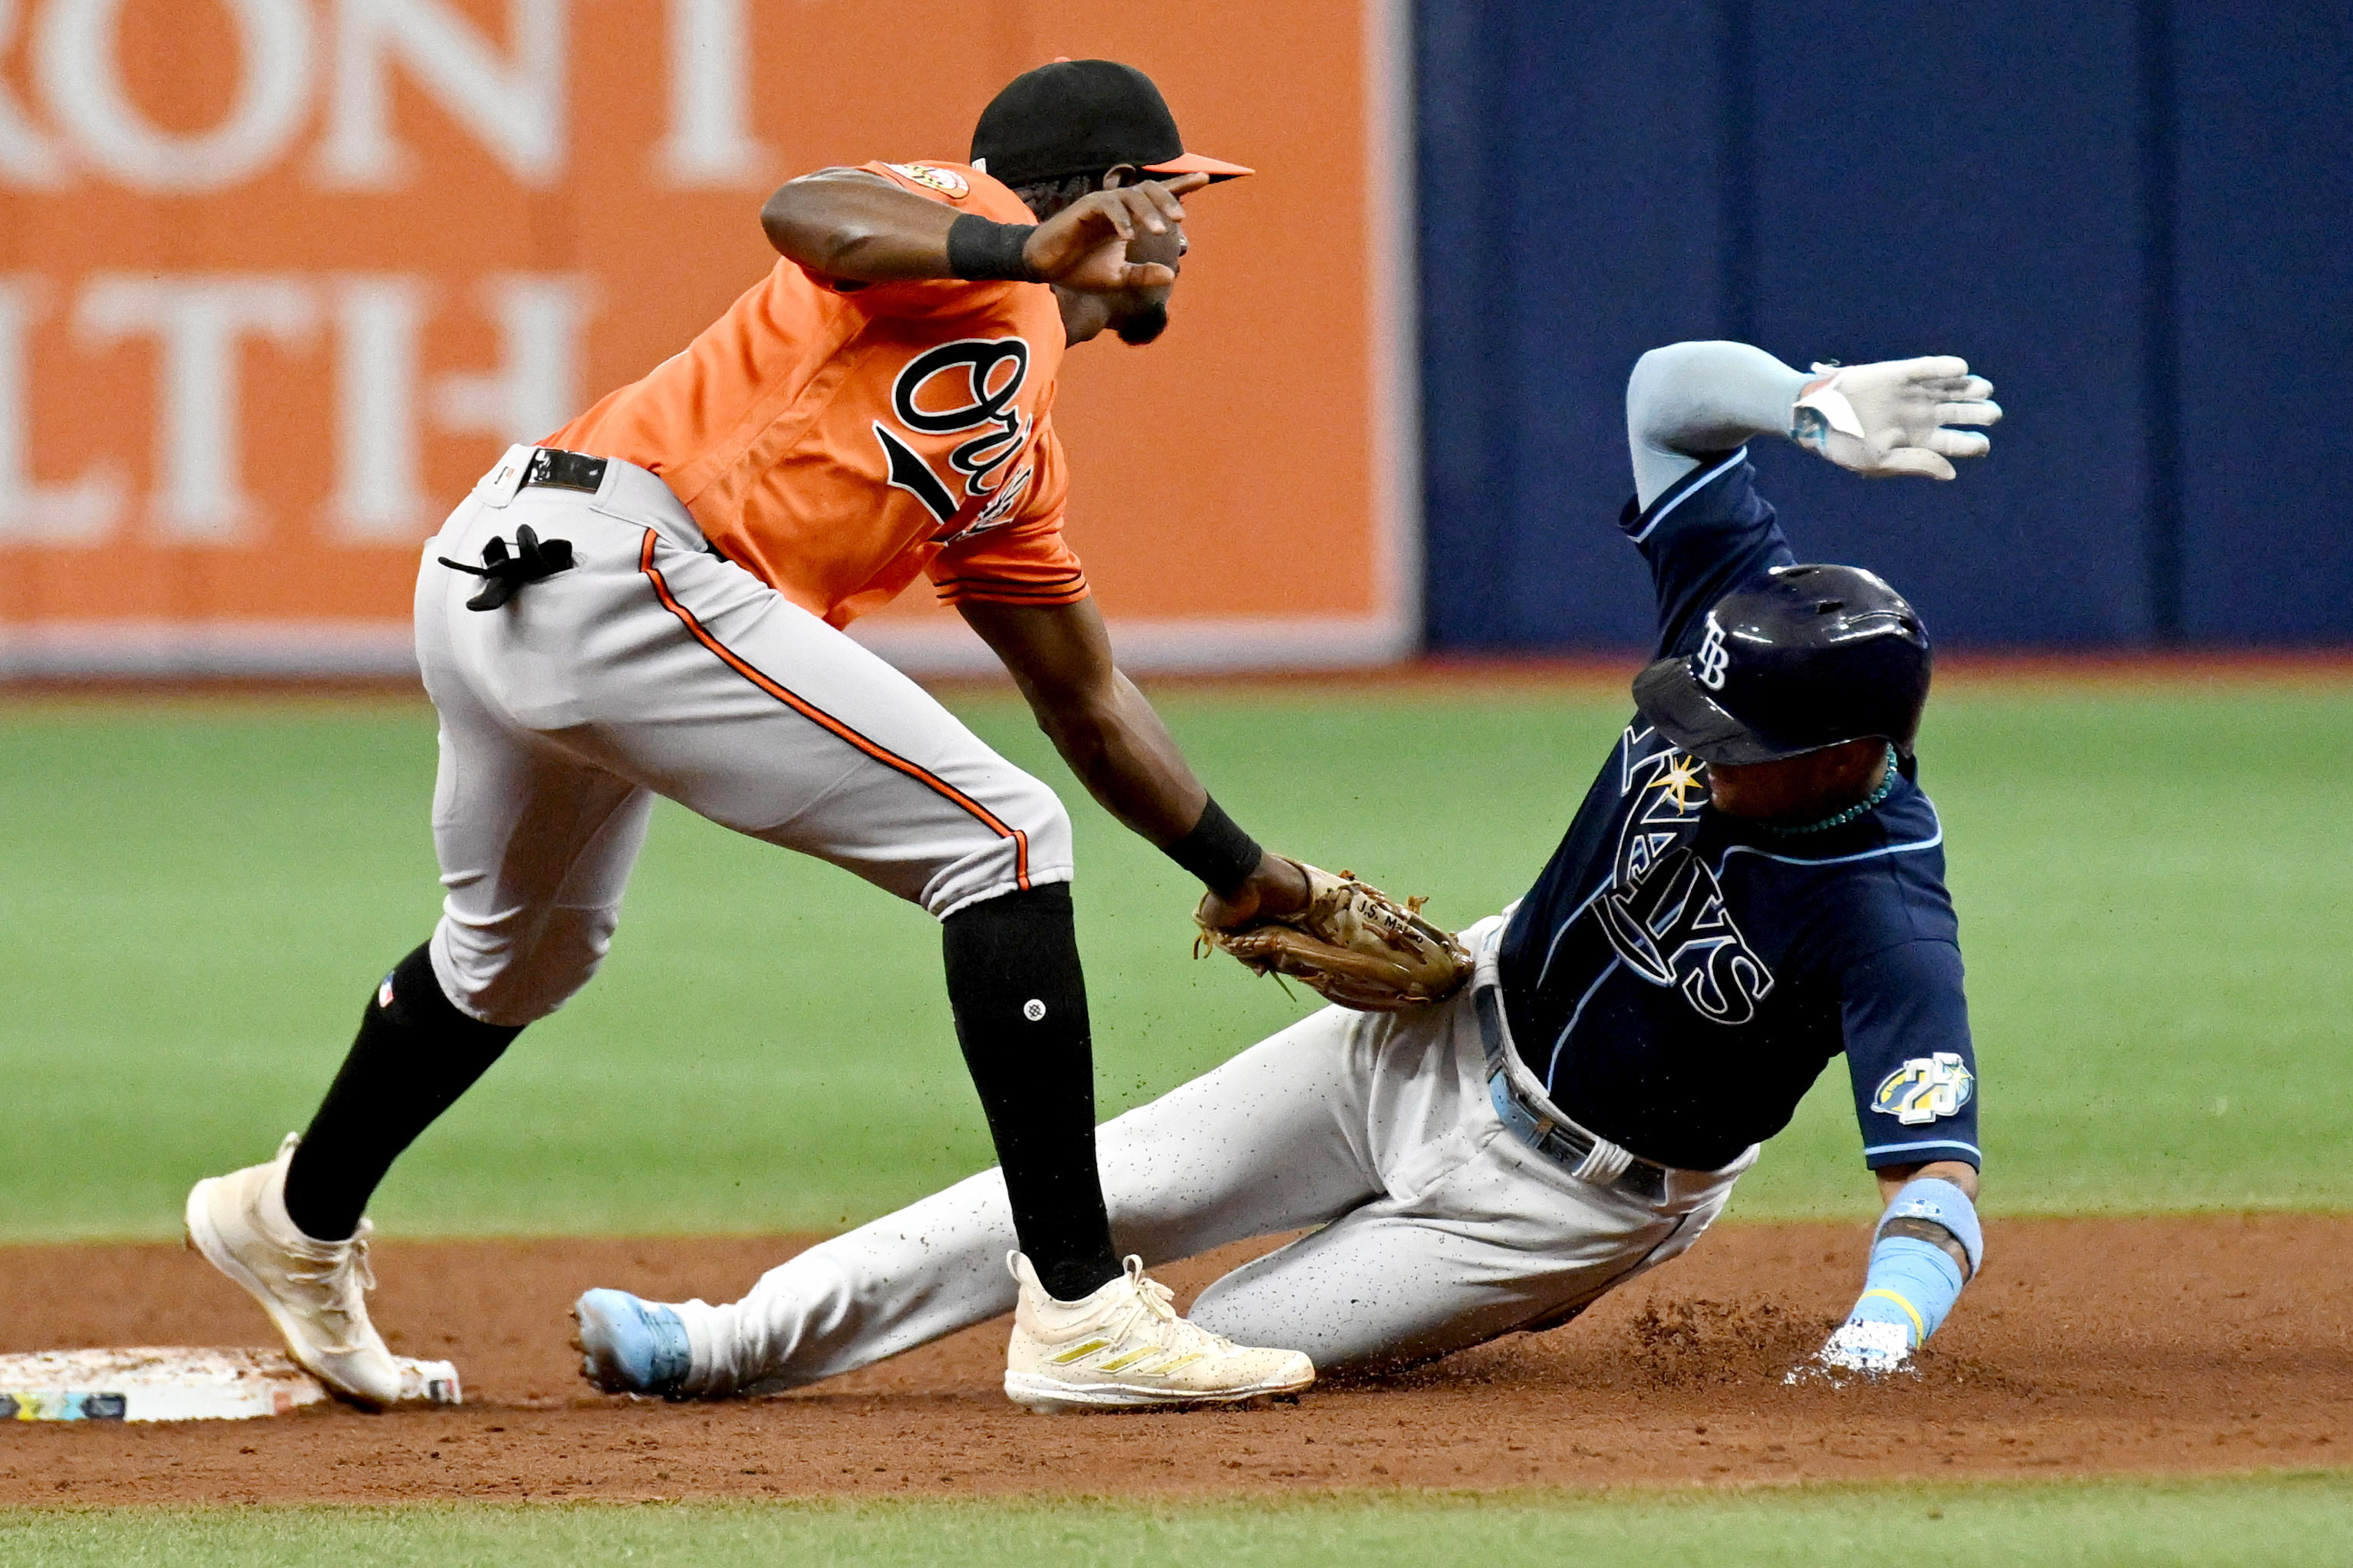 What You Need to Know About Tampa Bay Rays Games